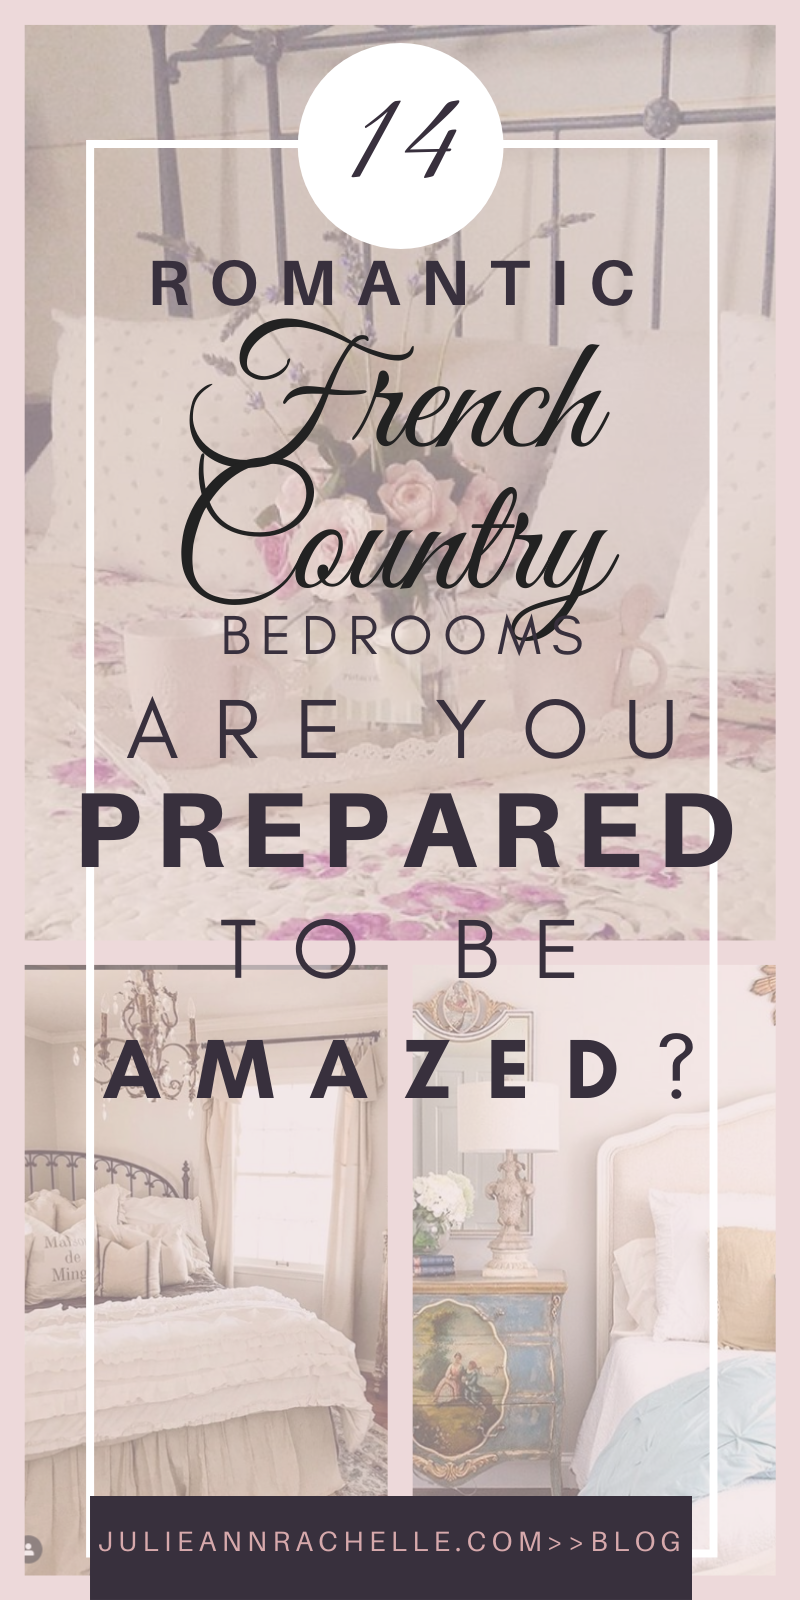 Romantic French Country Bedrooms Are You Prepared to be Amazed ...